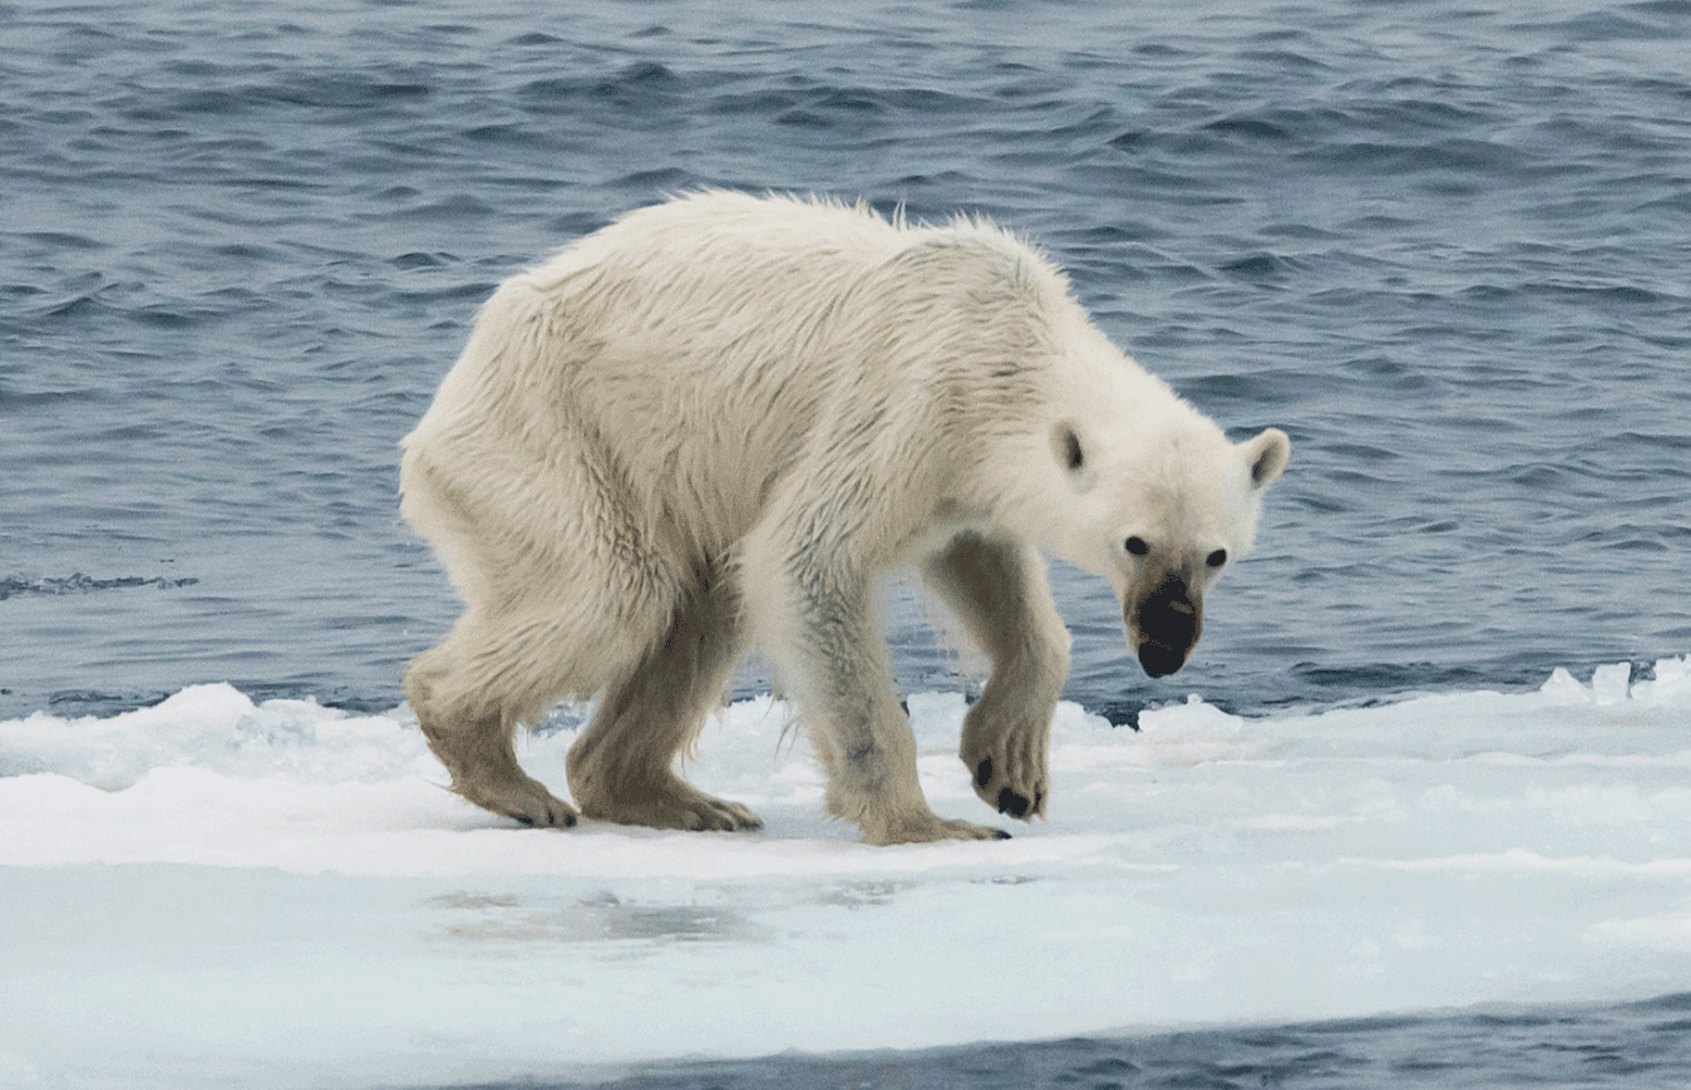 Nature docs like 'Our Planet' have a starving polar problem